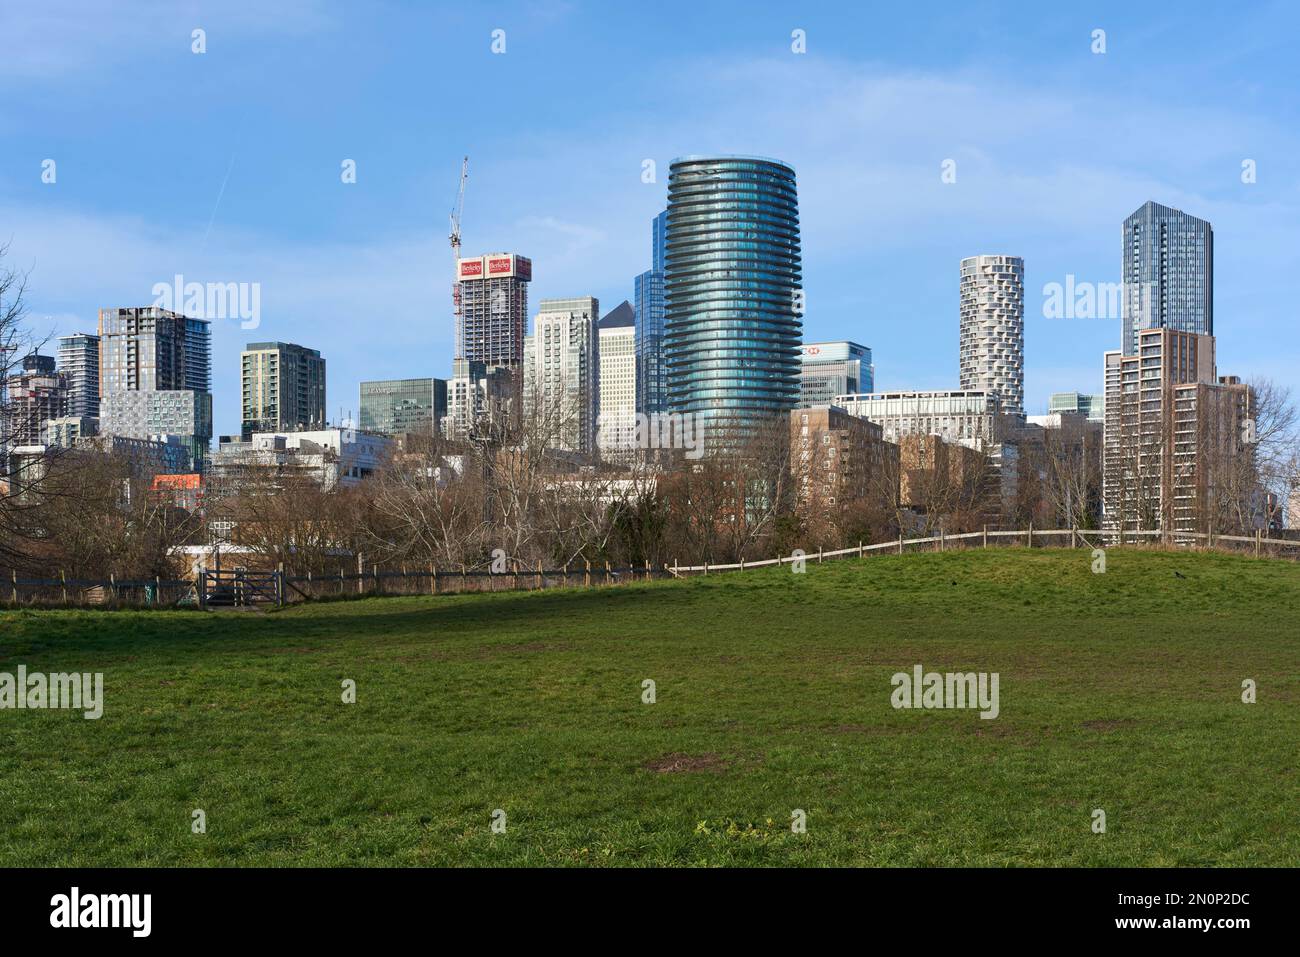 Canary Wharf business district viewed from Mudshute Park on the Isle of Dogs, London Docklands, UK Stock Photo